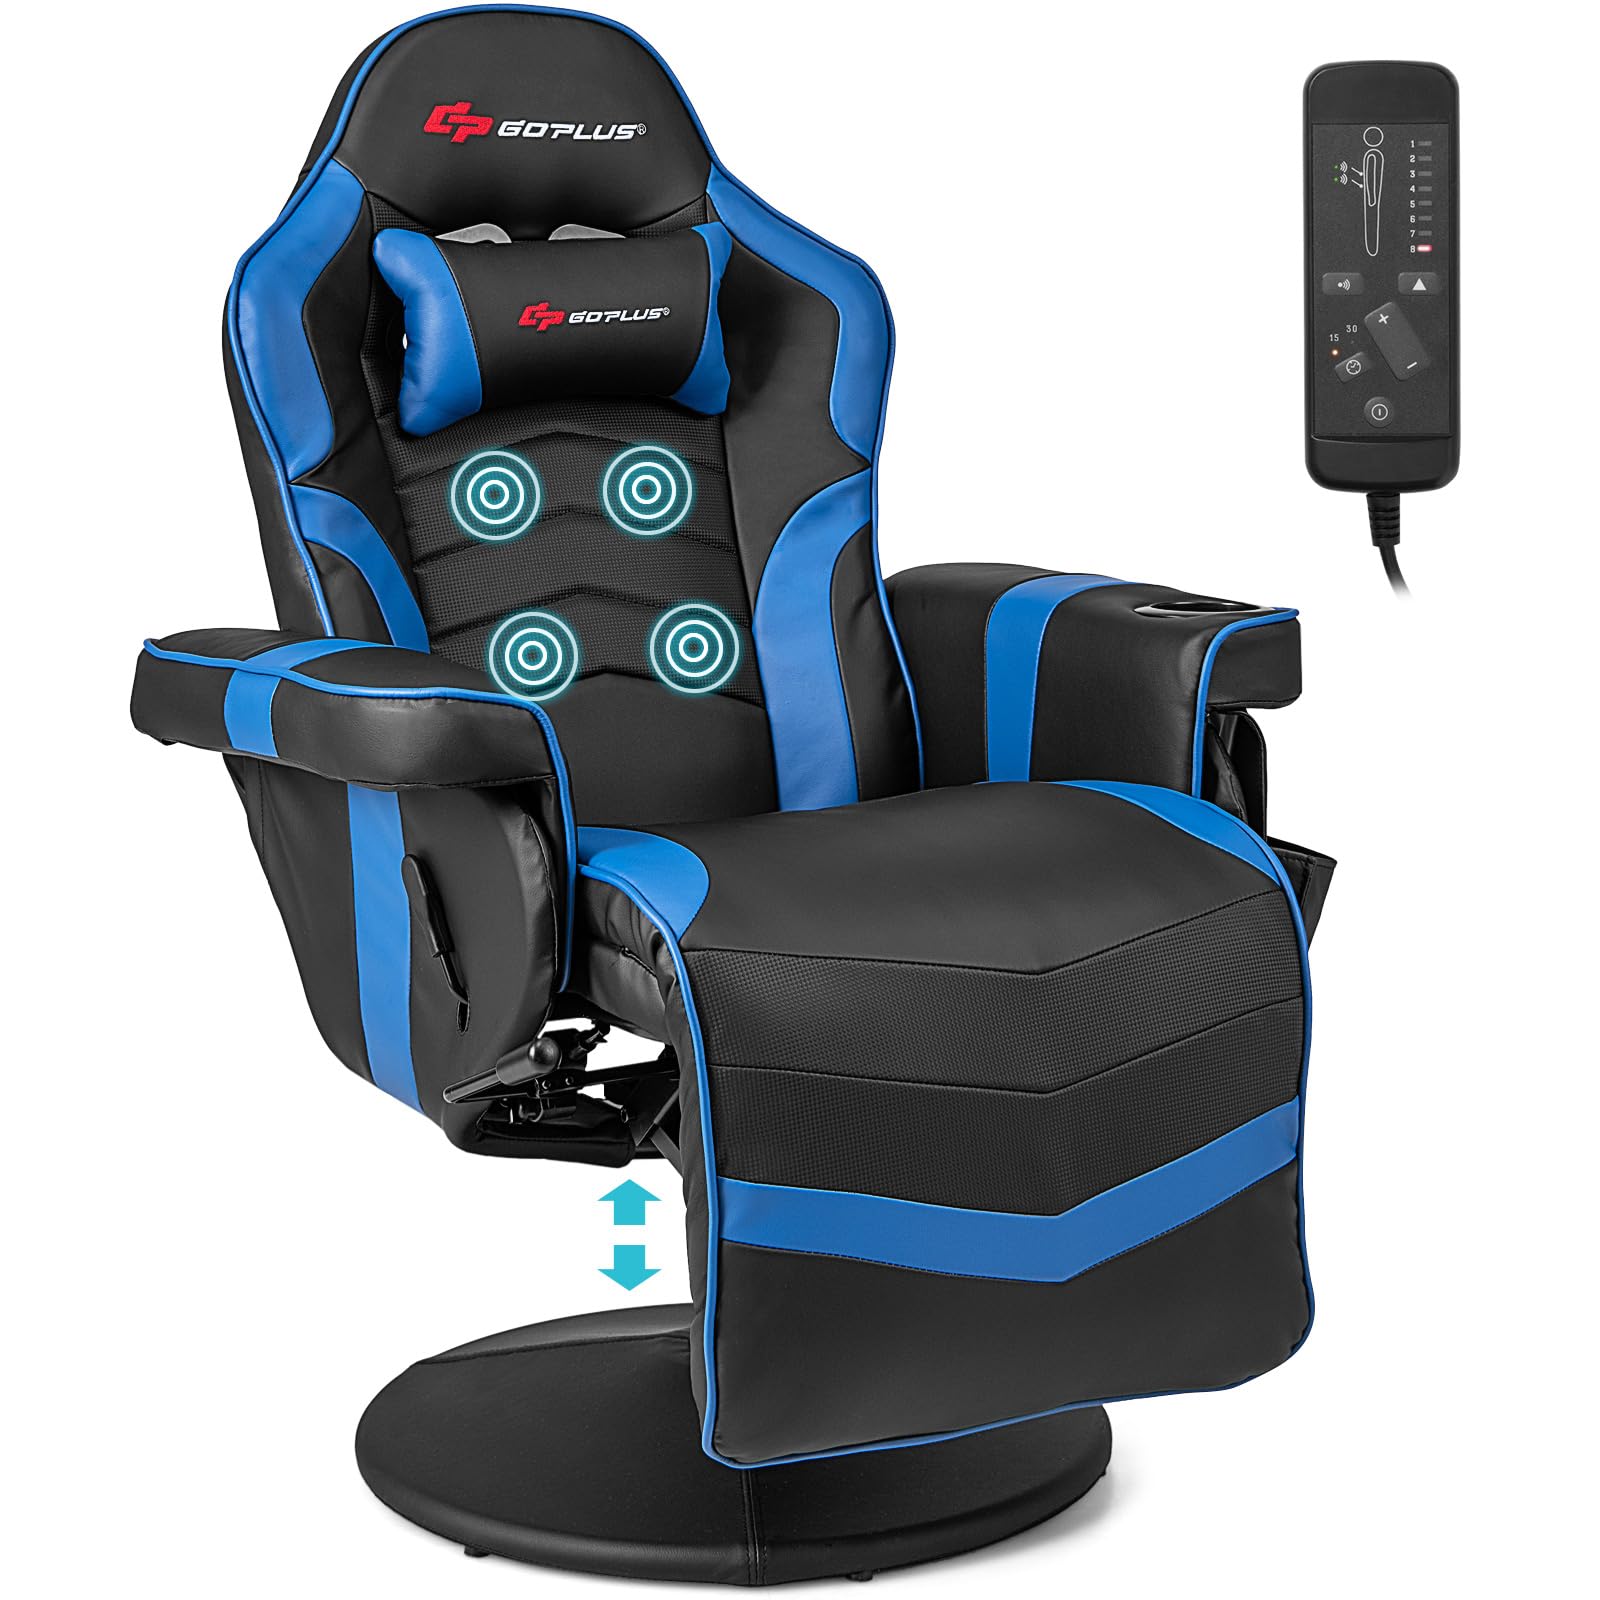 Goplus Gaming Chair, Height Adjustable Massage Video Game Chair with Retractable Footrest